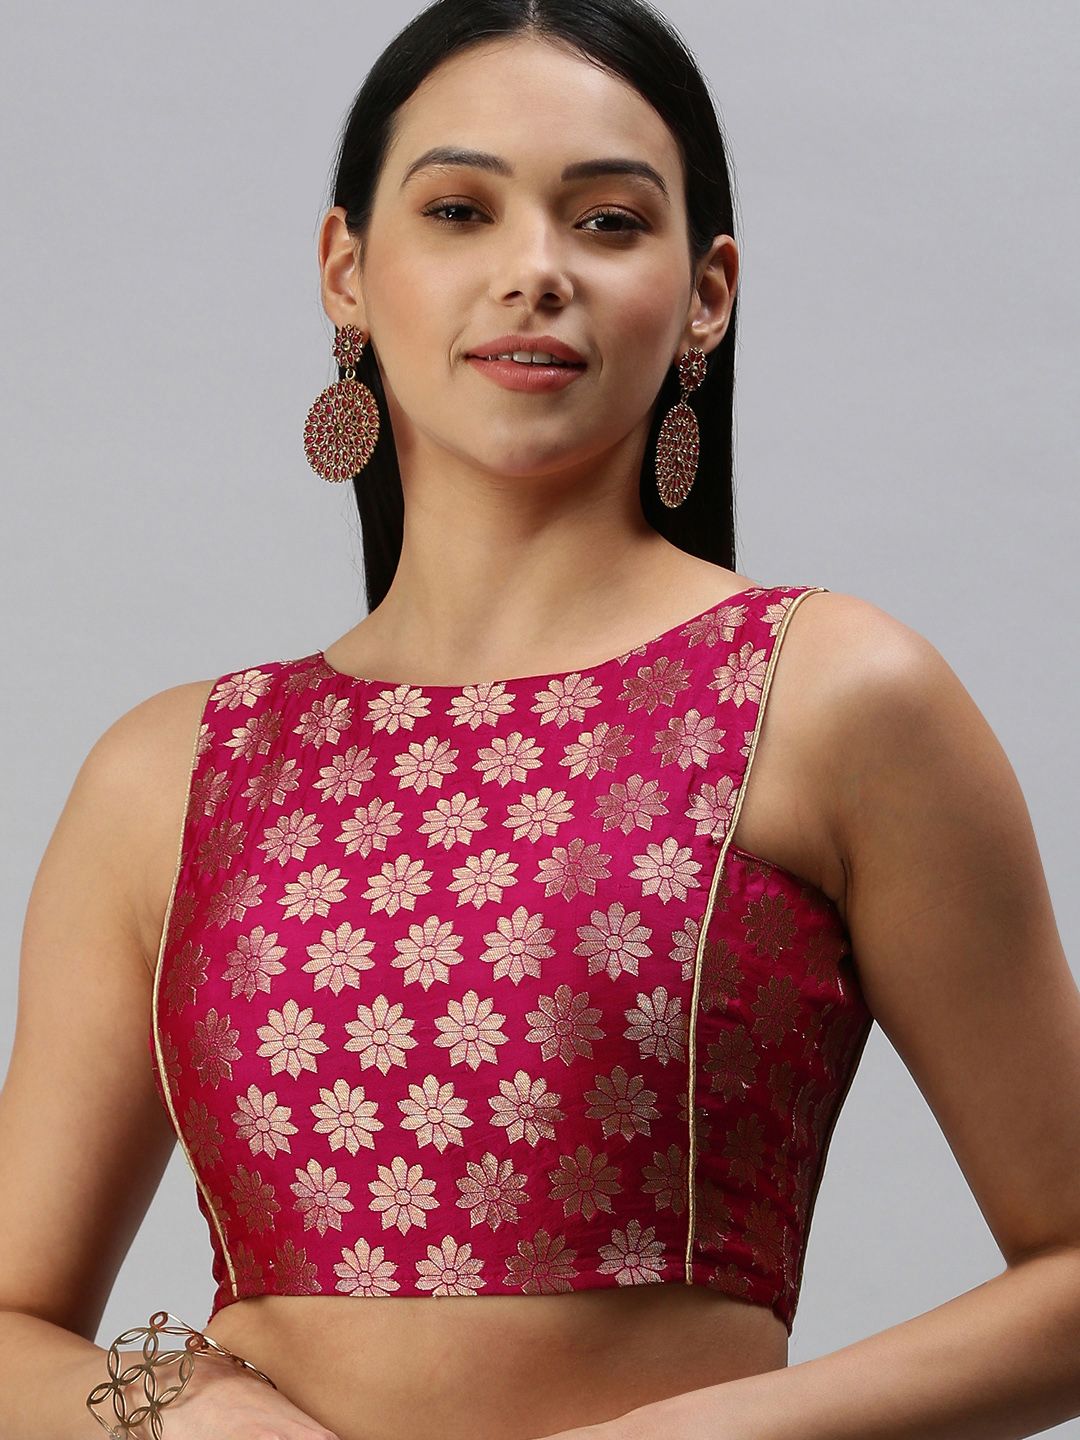 flaher Women Pink & Golden Ethnic Motifs Woven Design Jacquard Padded Blouse Price in India